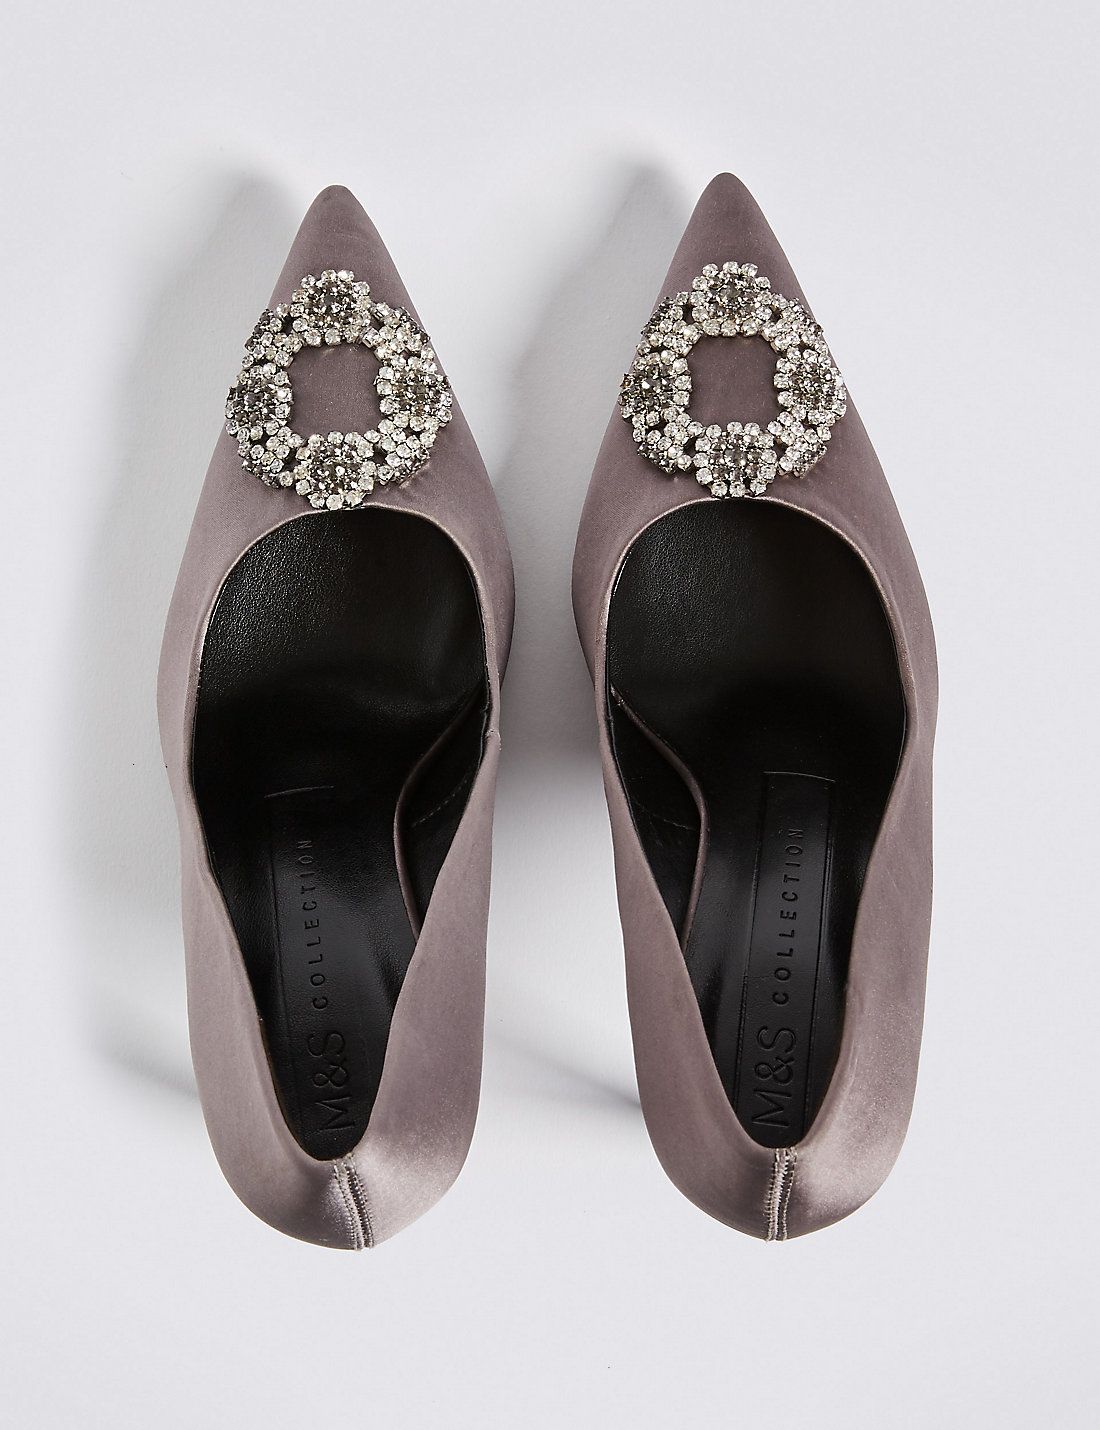 Marks & Spencer are selling copycat versions of the Manolo Blahnik